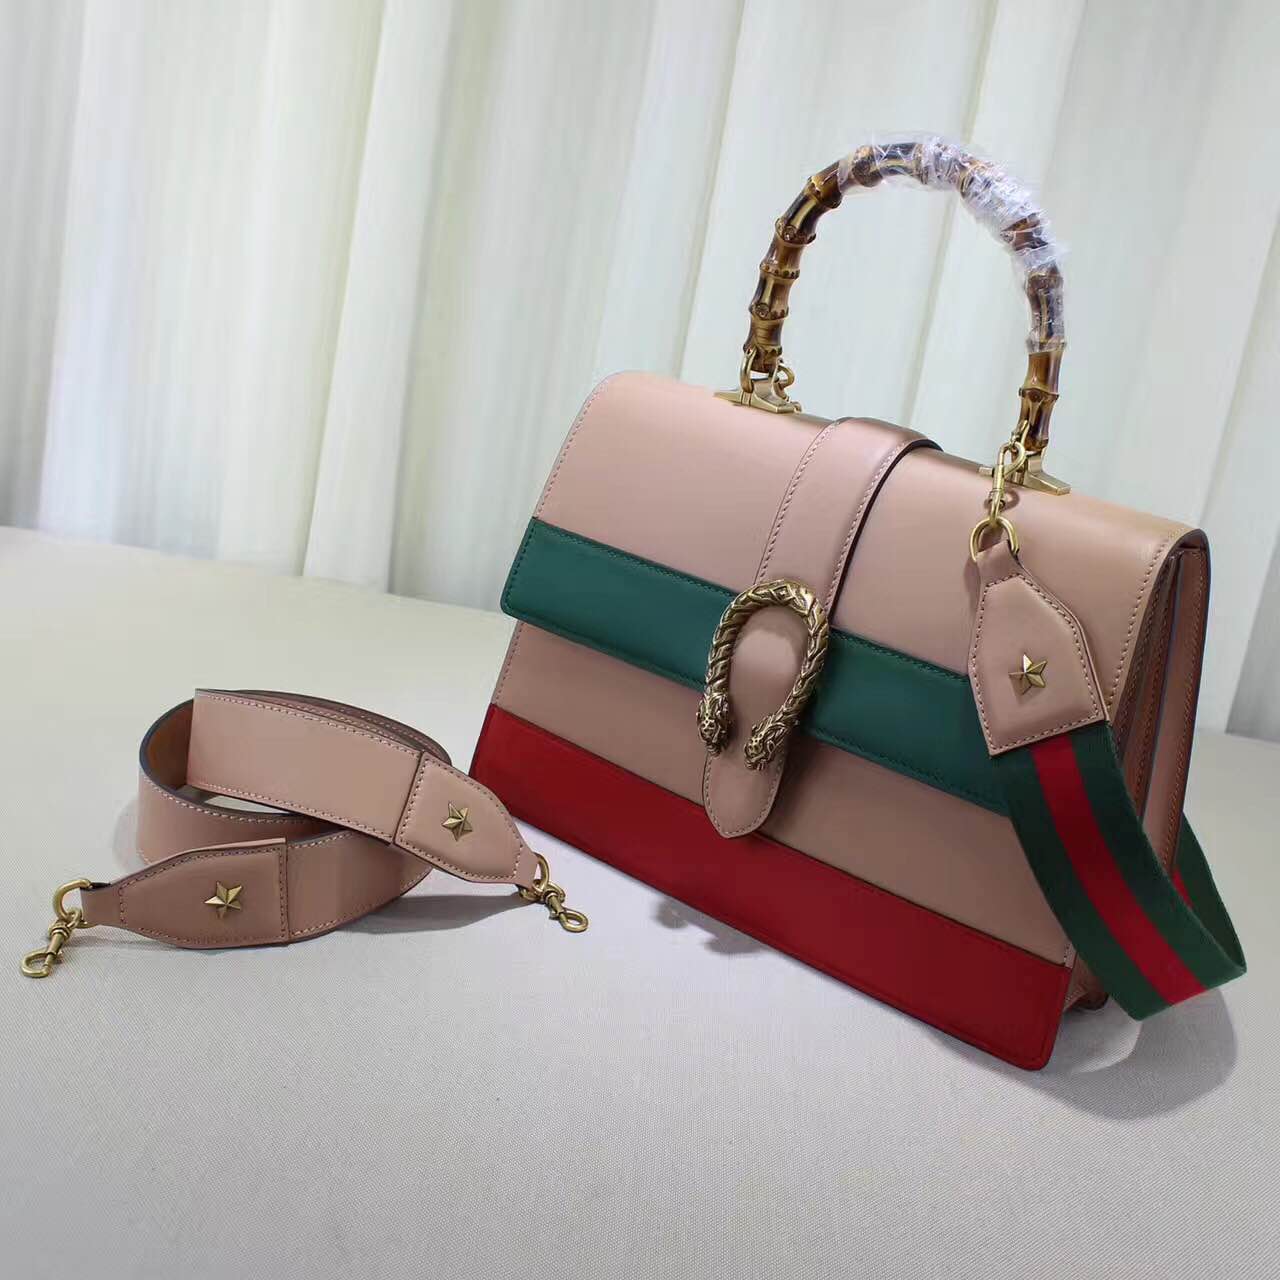 Gucci Bamboo Smooth Leather Top Handle Bag 17410